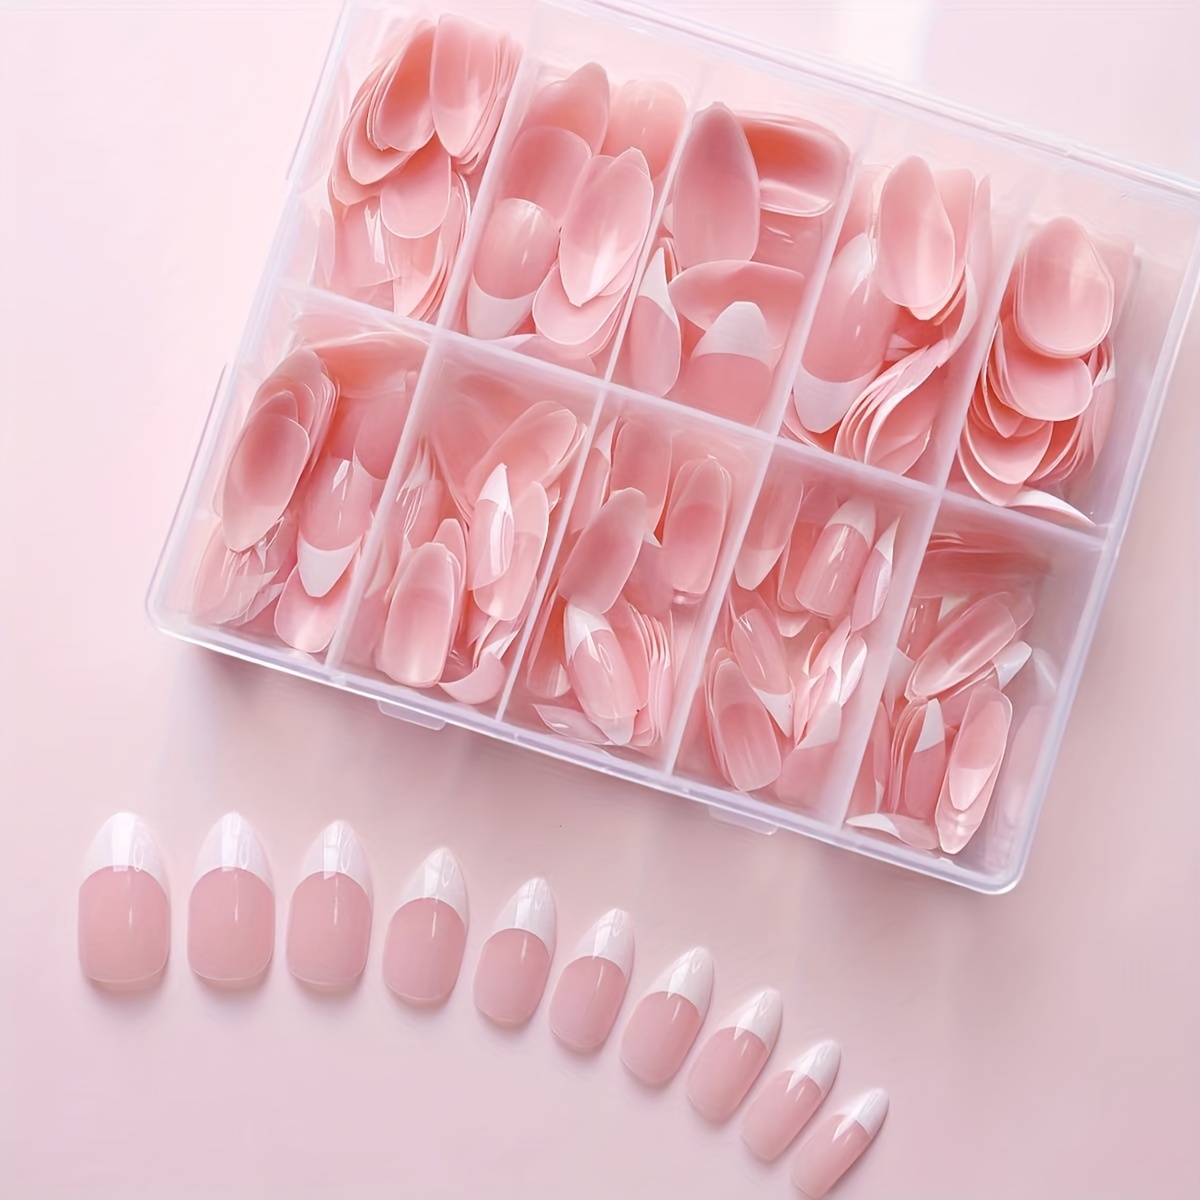 

120pcs/240pcs/360pcs Boxed Almond-shaped French Tip Nail Pre-made Nail Decals With Mixed Color Scheme And Glossy Finish